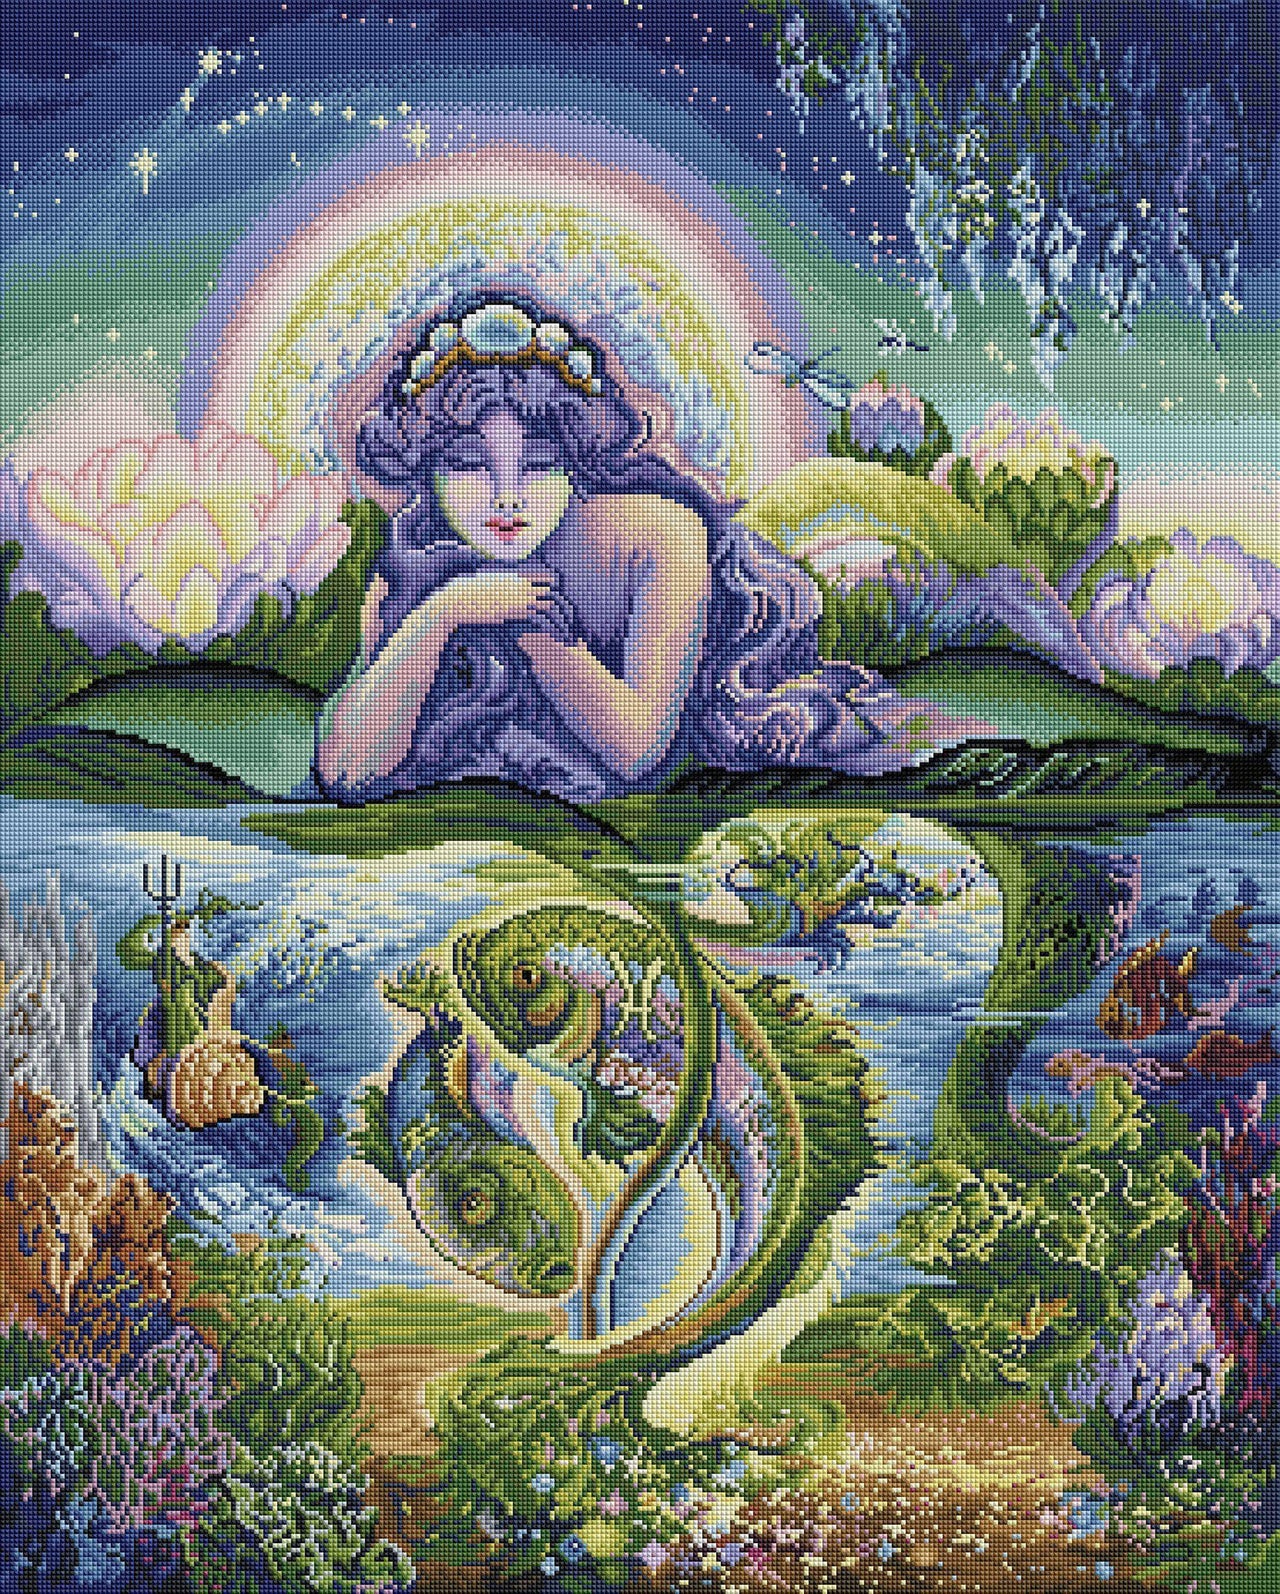 Diamond Painting Pisces 27.6" x 34.3″ (70cm x 87cm) / Square with 66 Colors including 4 ABs / 95,565